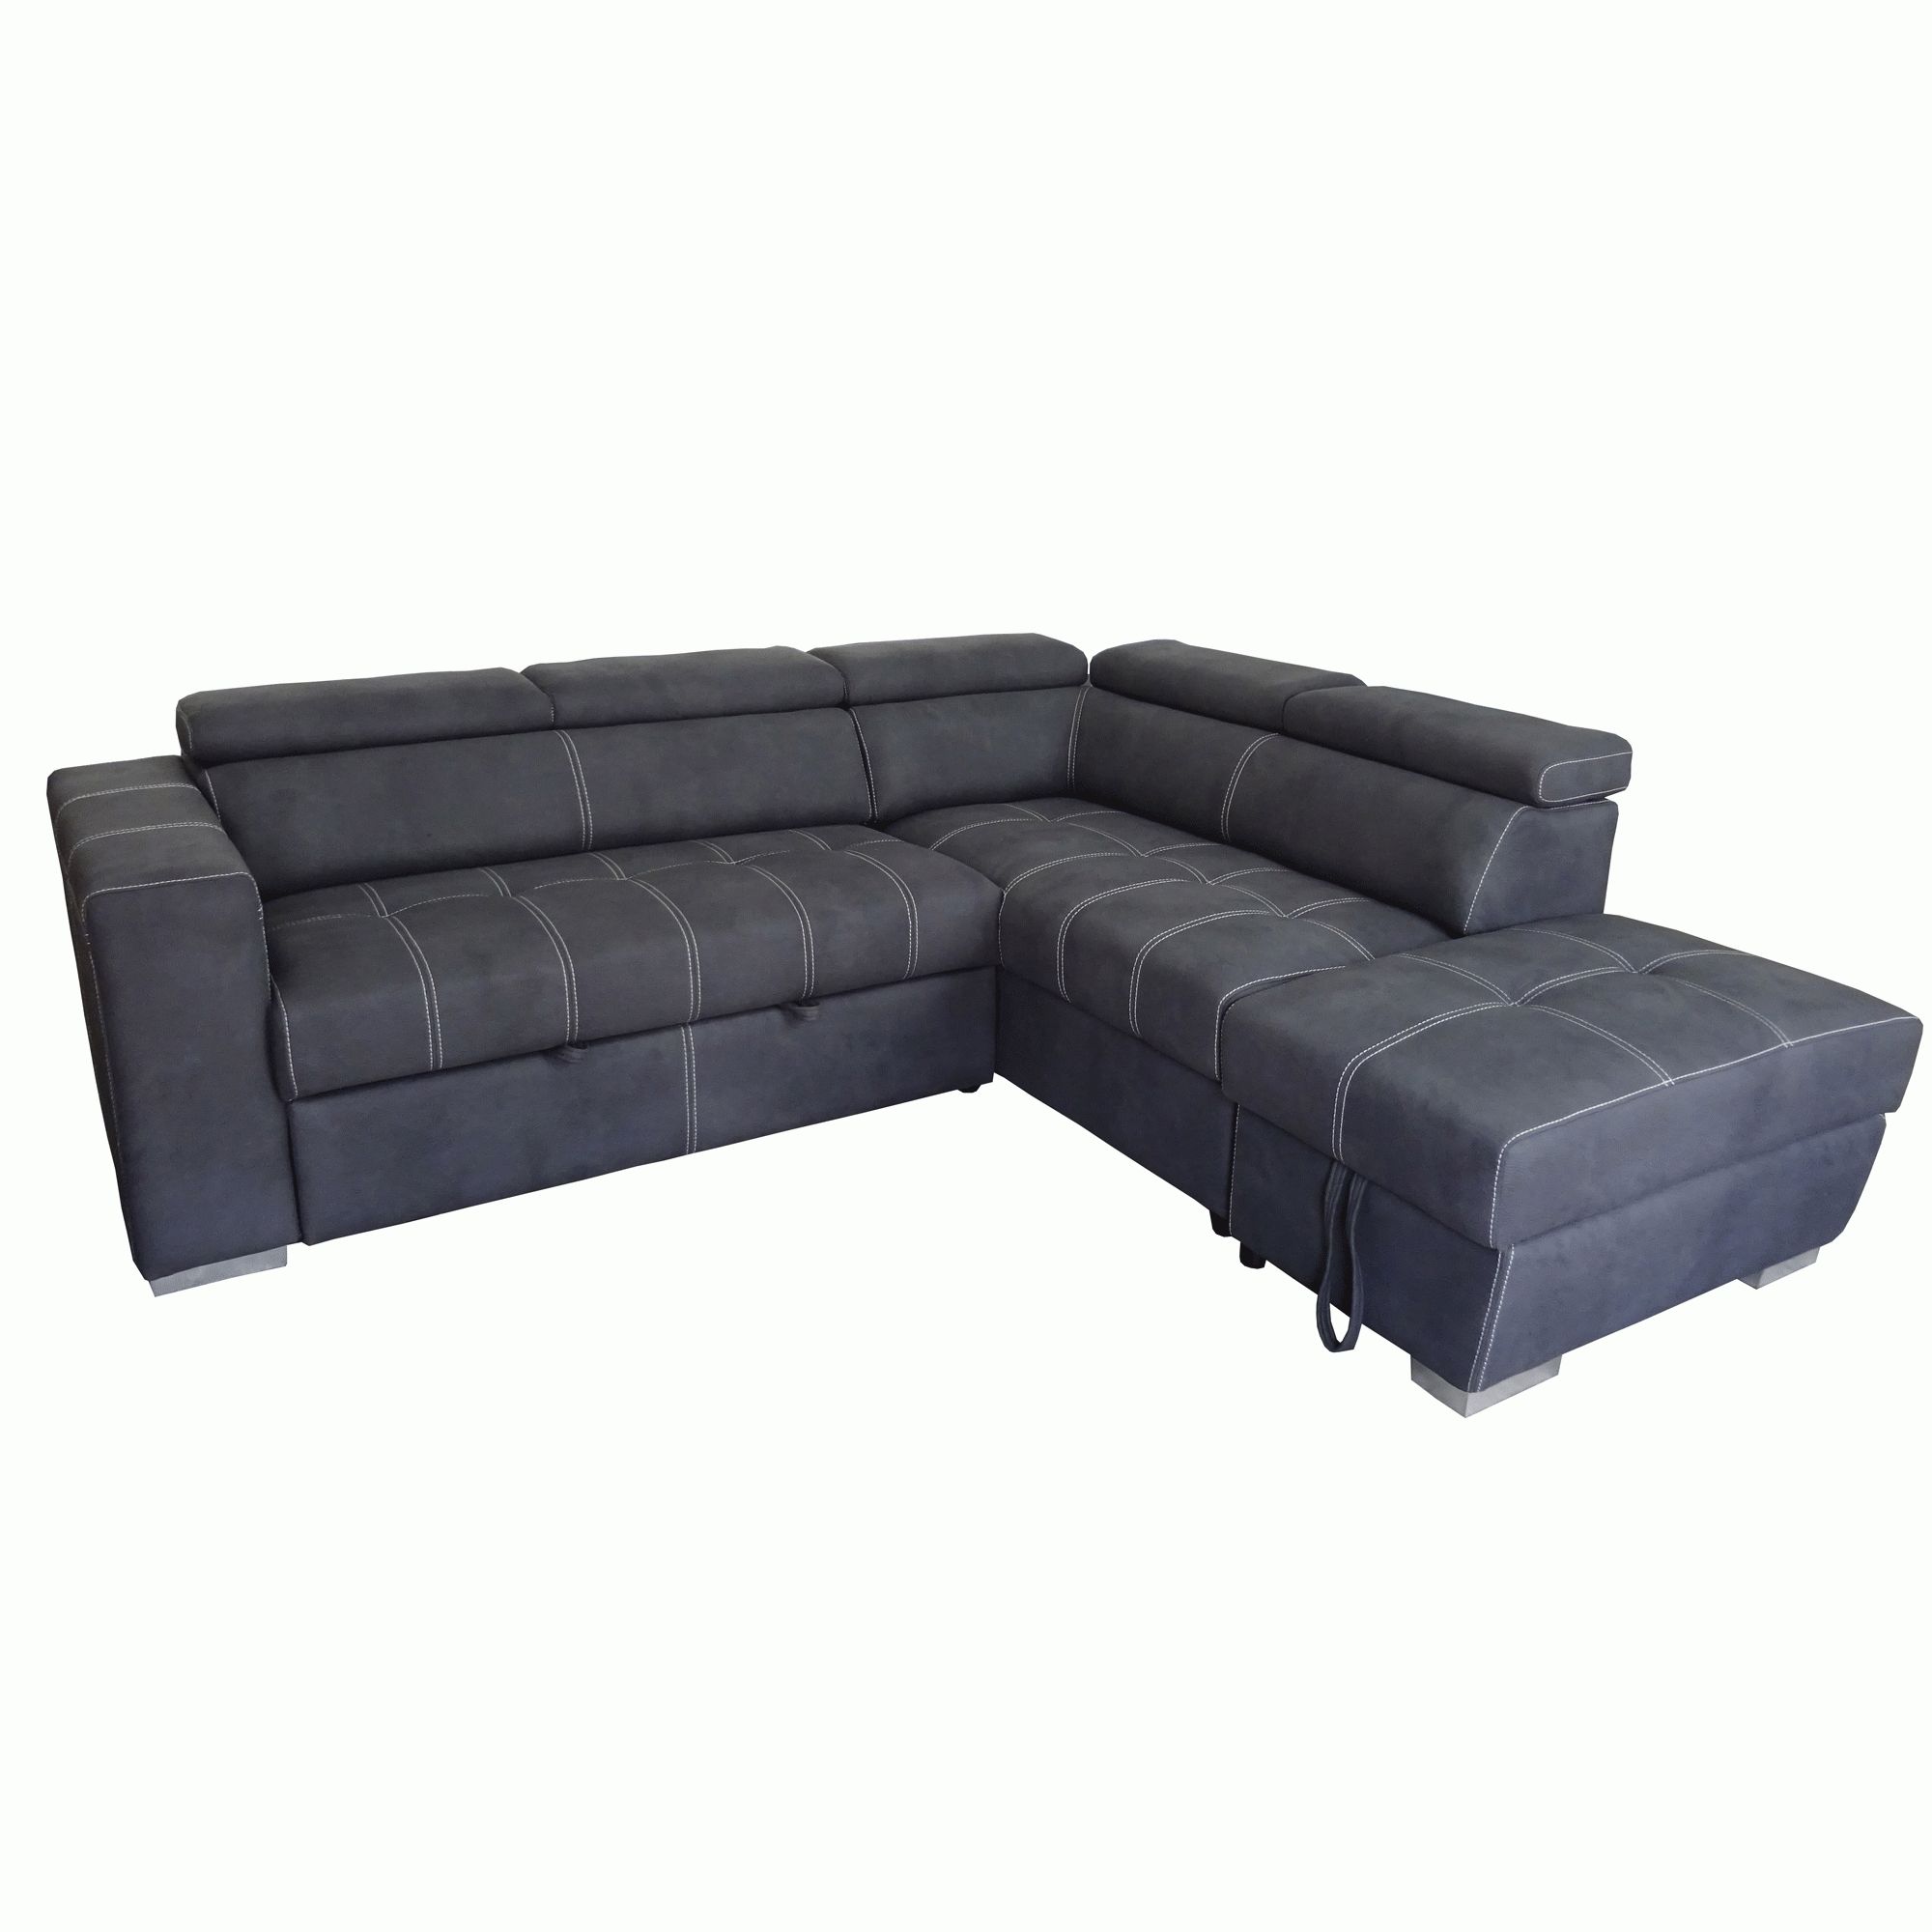 Sectional Sofas | Sectional Couches – Bernie & Phyl's Furniture Intended For Nh Sectional Sofas (View 6 of 10)